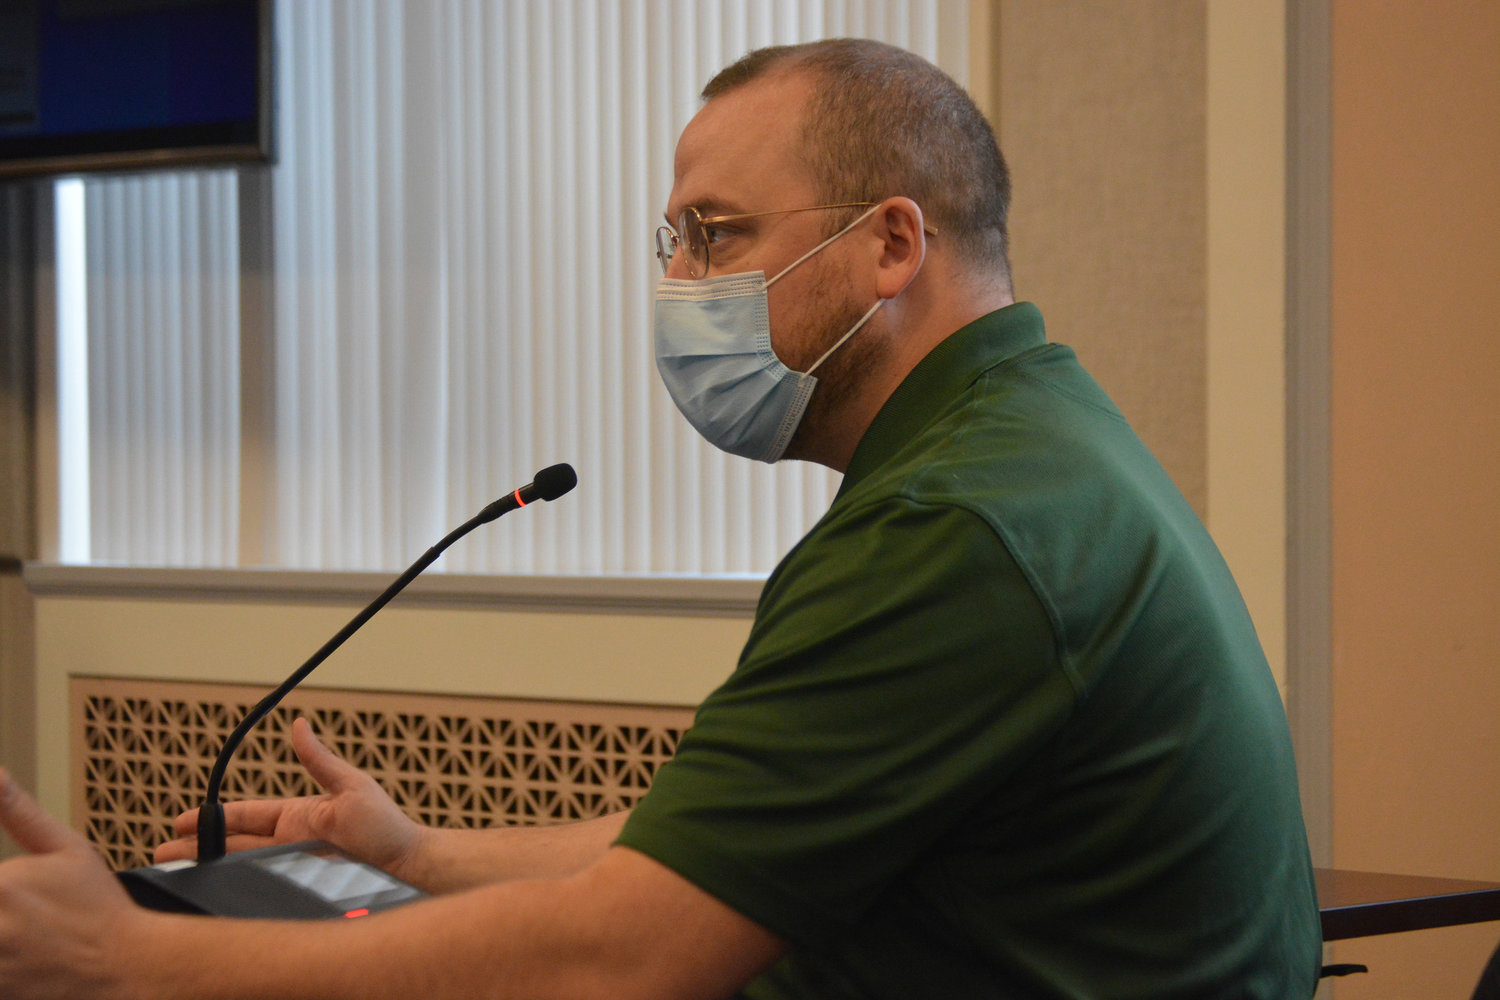 FILE PHOTO — Lewis County Public Health Director J.P. Anderson announces policies in how the county will publicly report COVID-19 cases in a meeting last year.